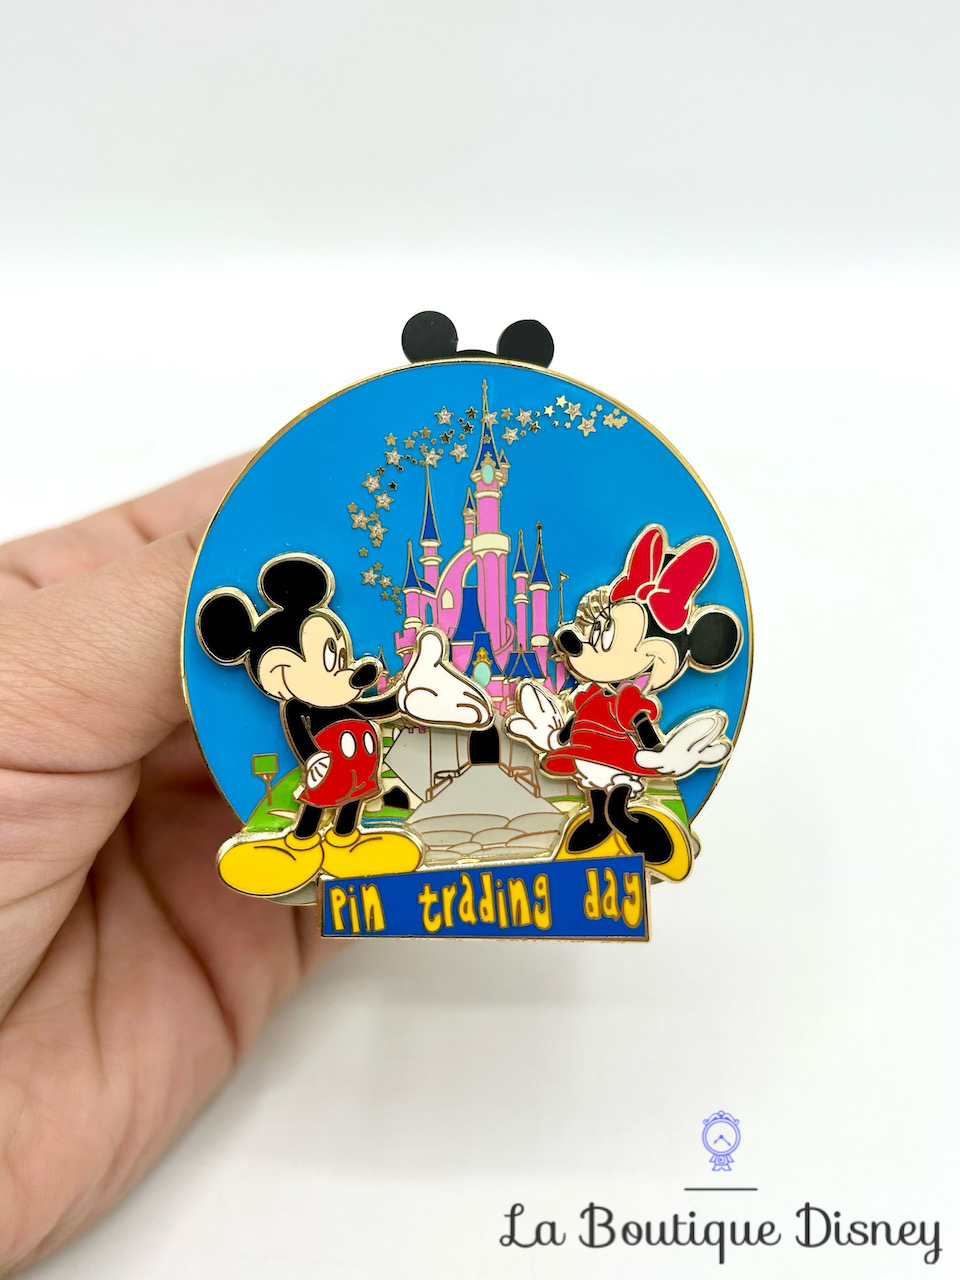 Pin Mickey & Minnie Mouse Pin Trading Day Édition Limitée 800 Disneyland Paris 2005 Tradition 40973